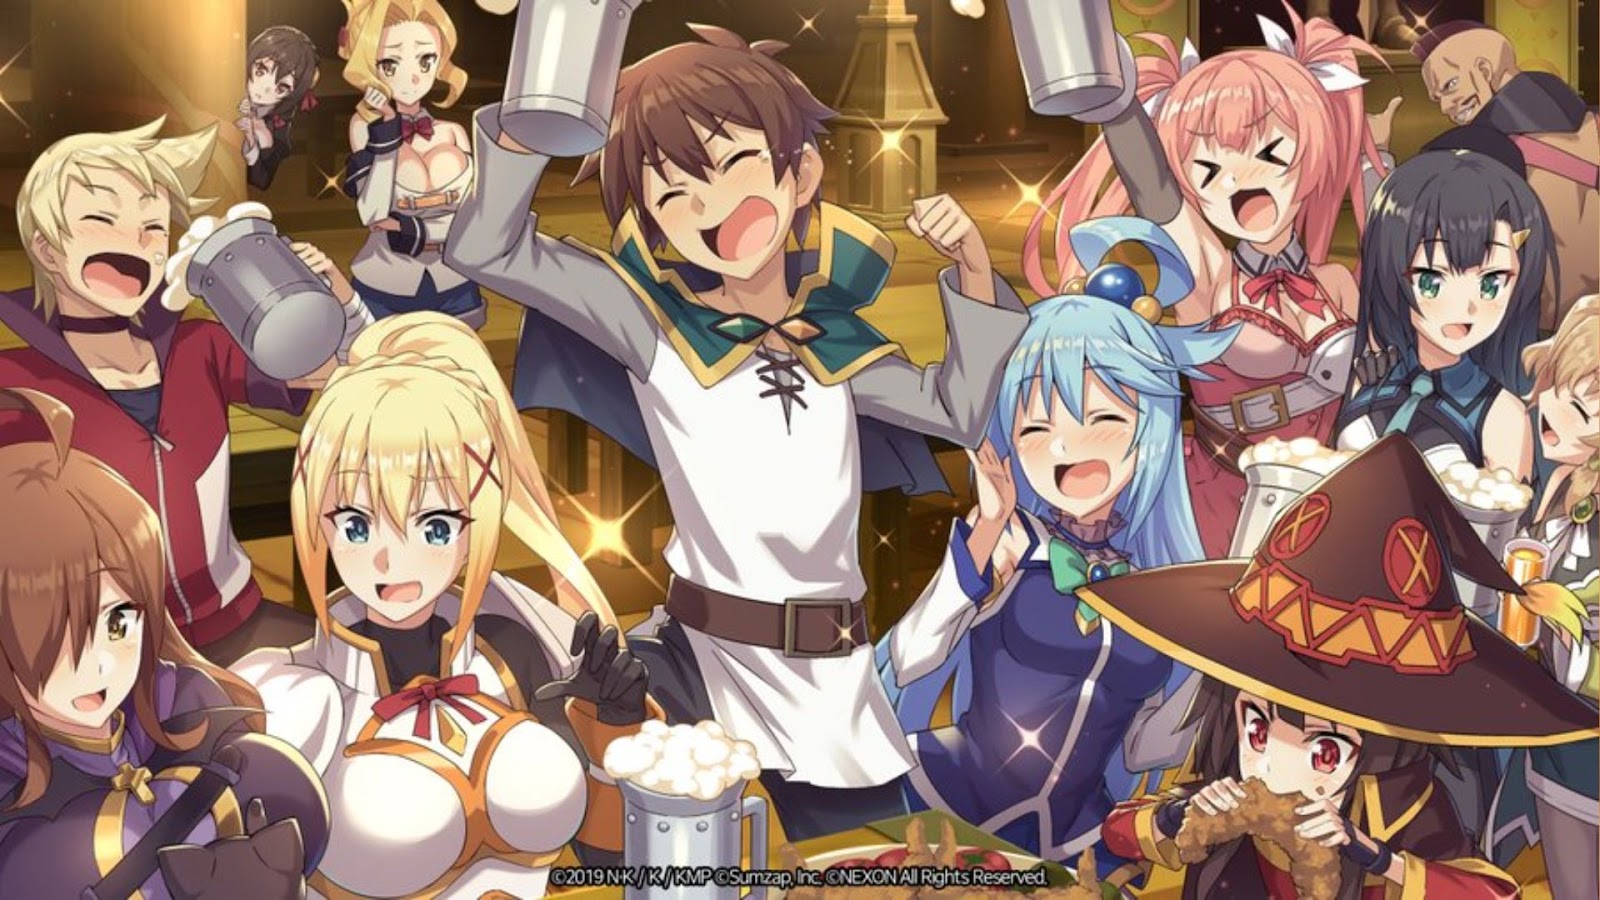 Anime Industry Faces Rare Leaks as Konosuba and Other Series Hit by Unauthorized Releases